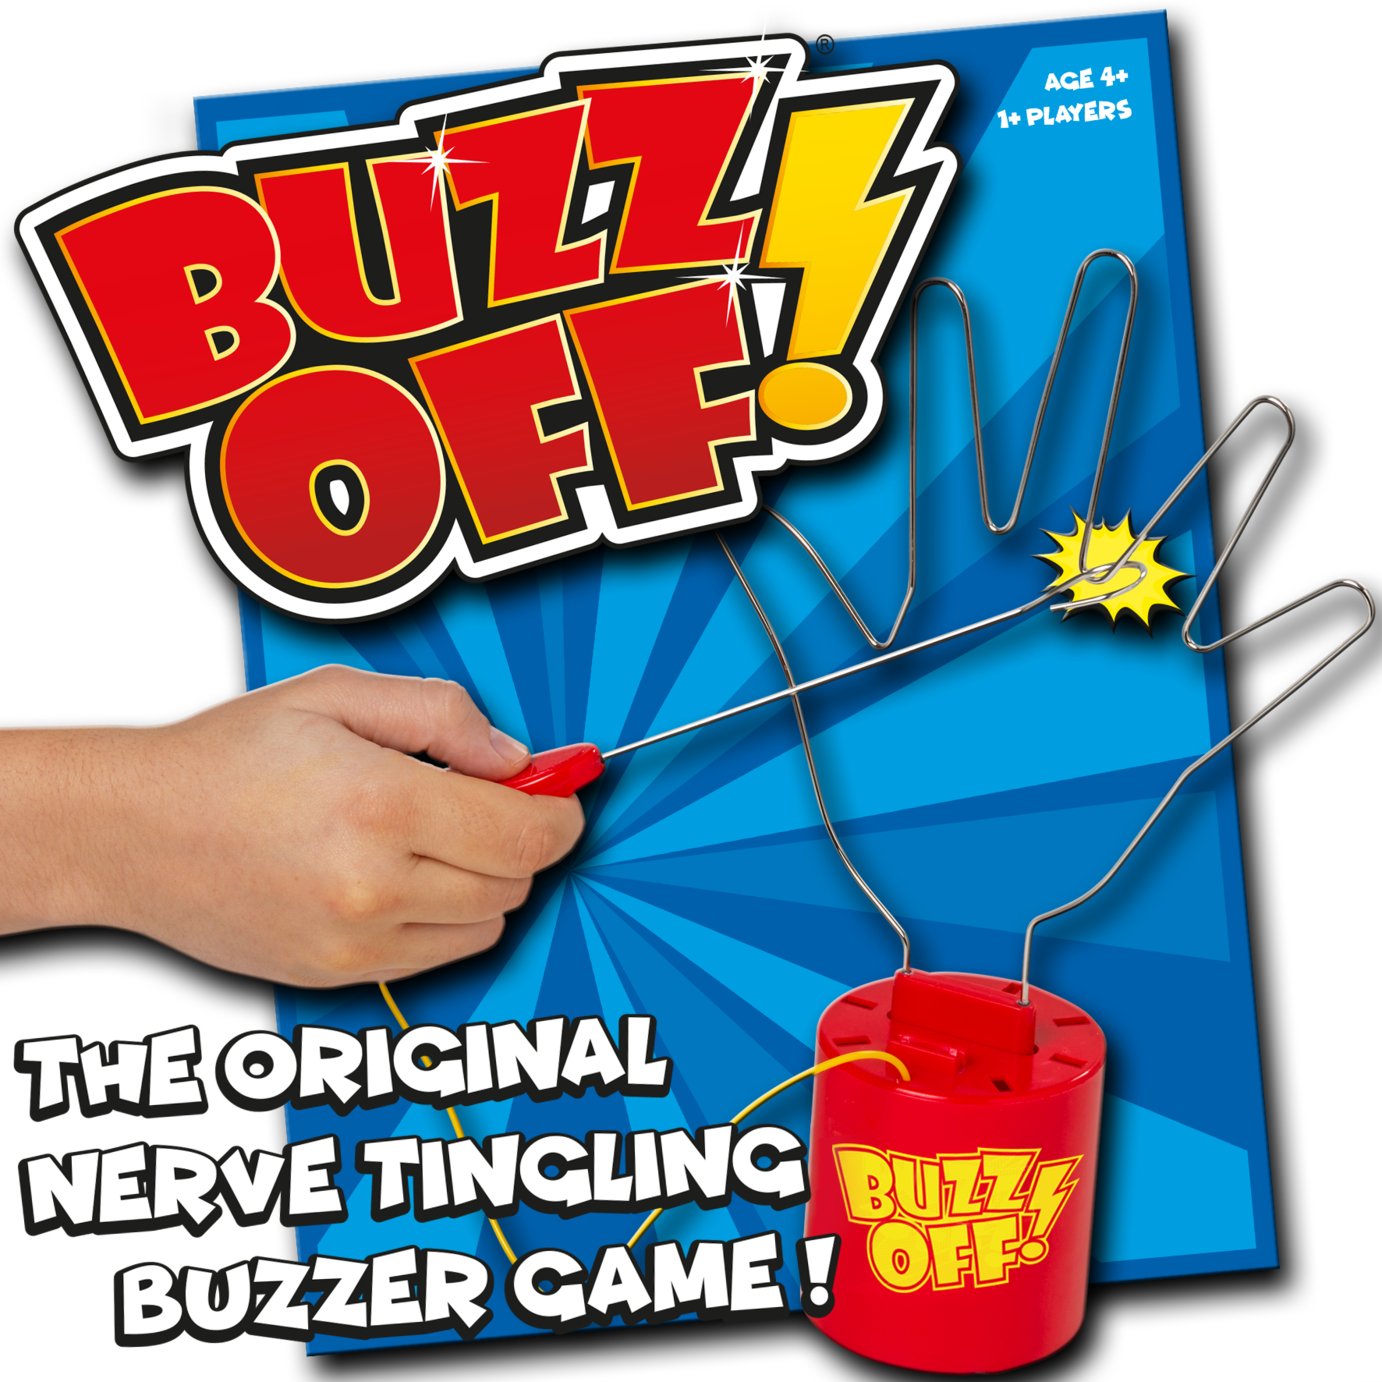 Ideal Buzz Off Game review